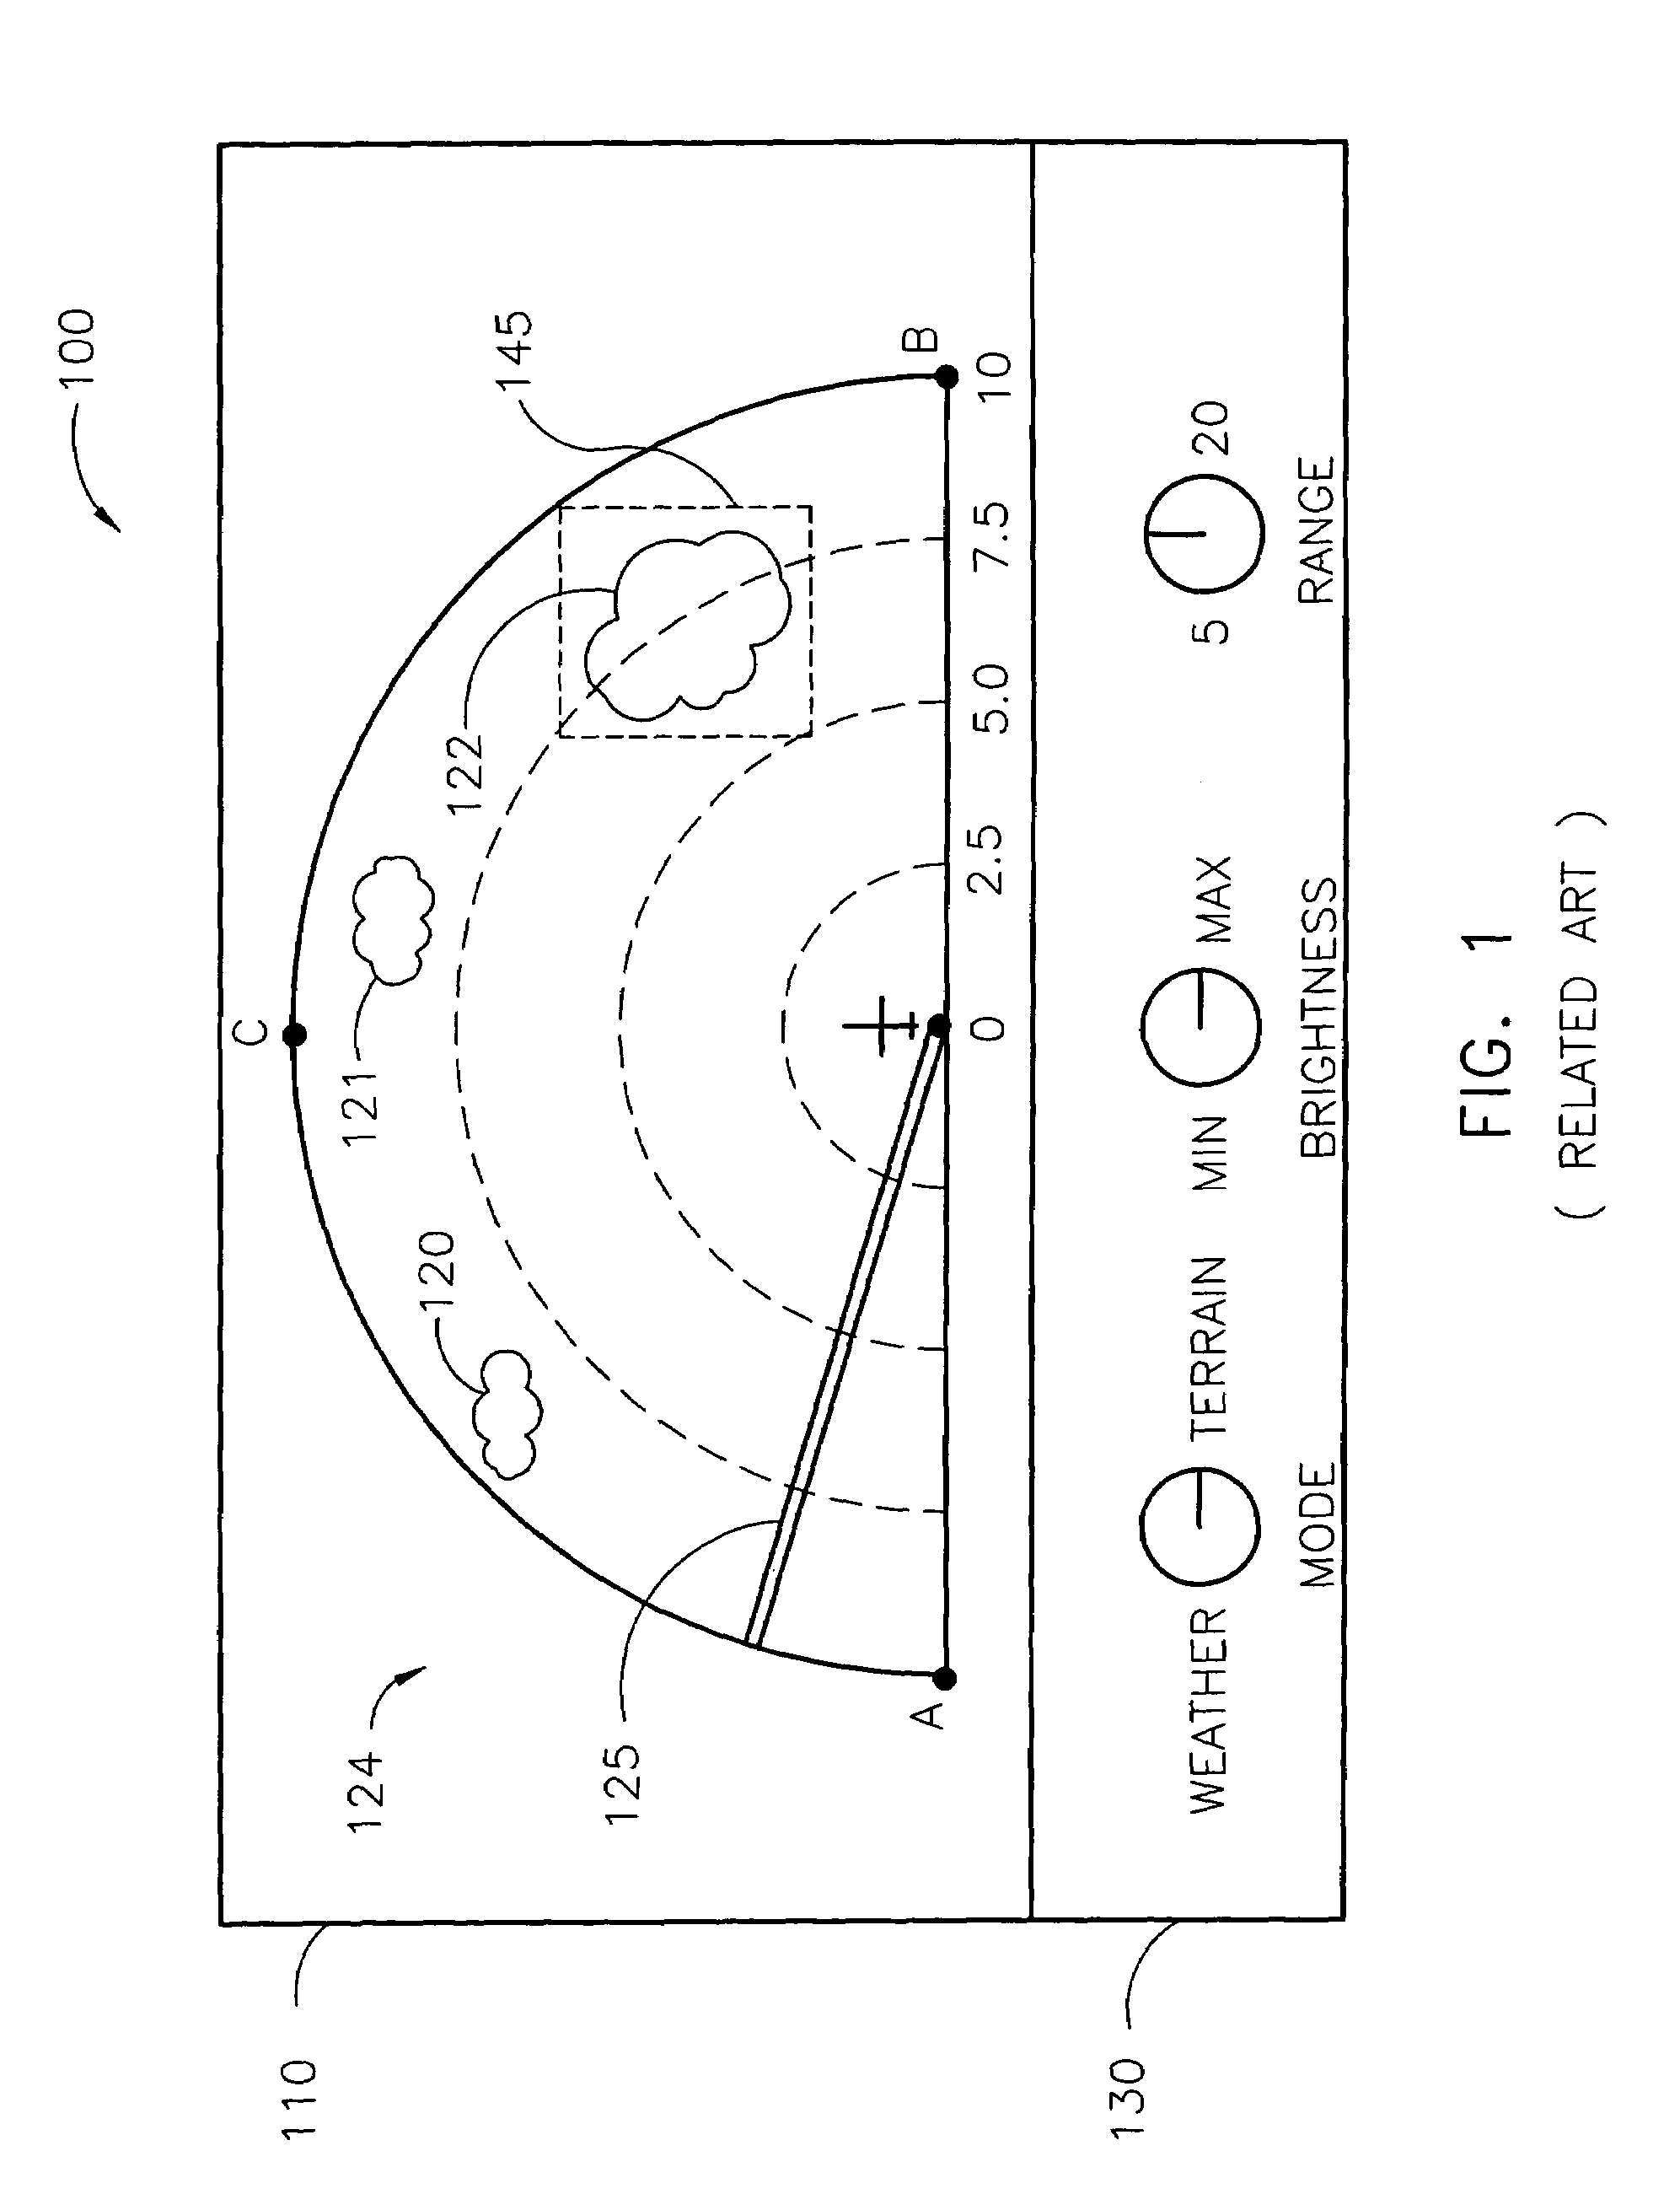 Systems and methods for displaying hazards